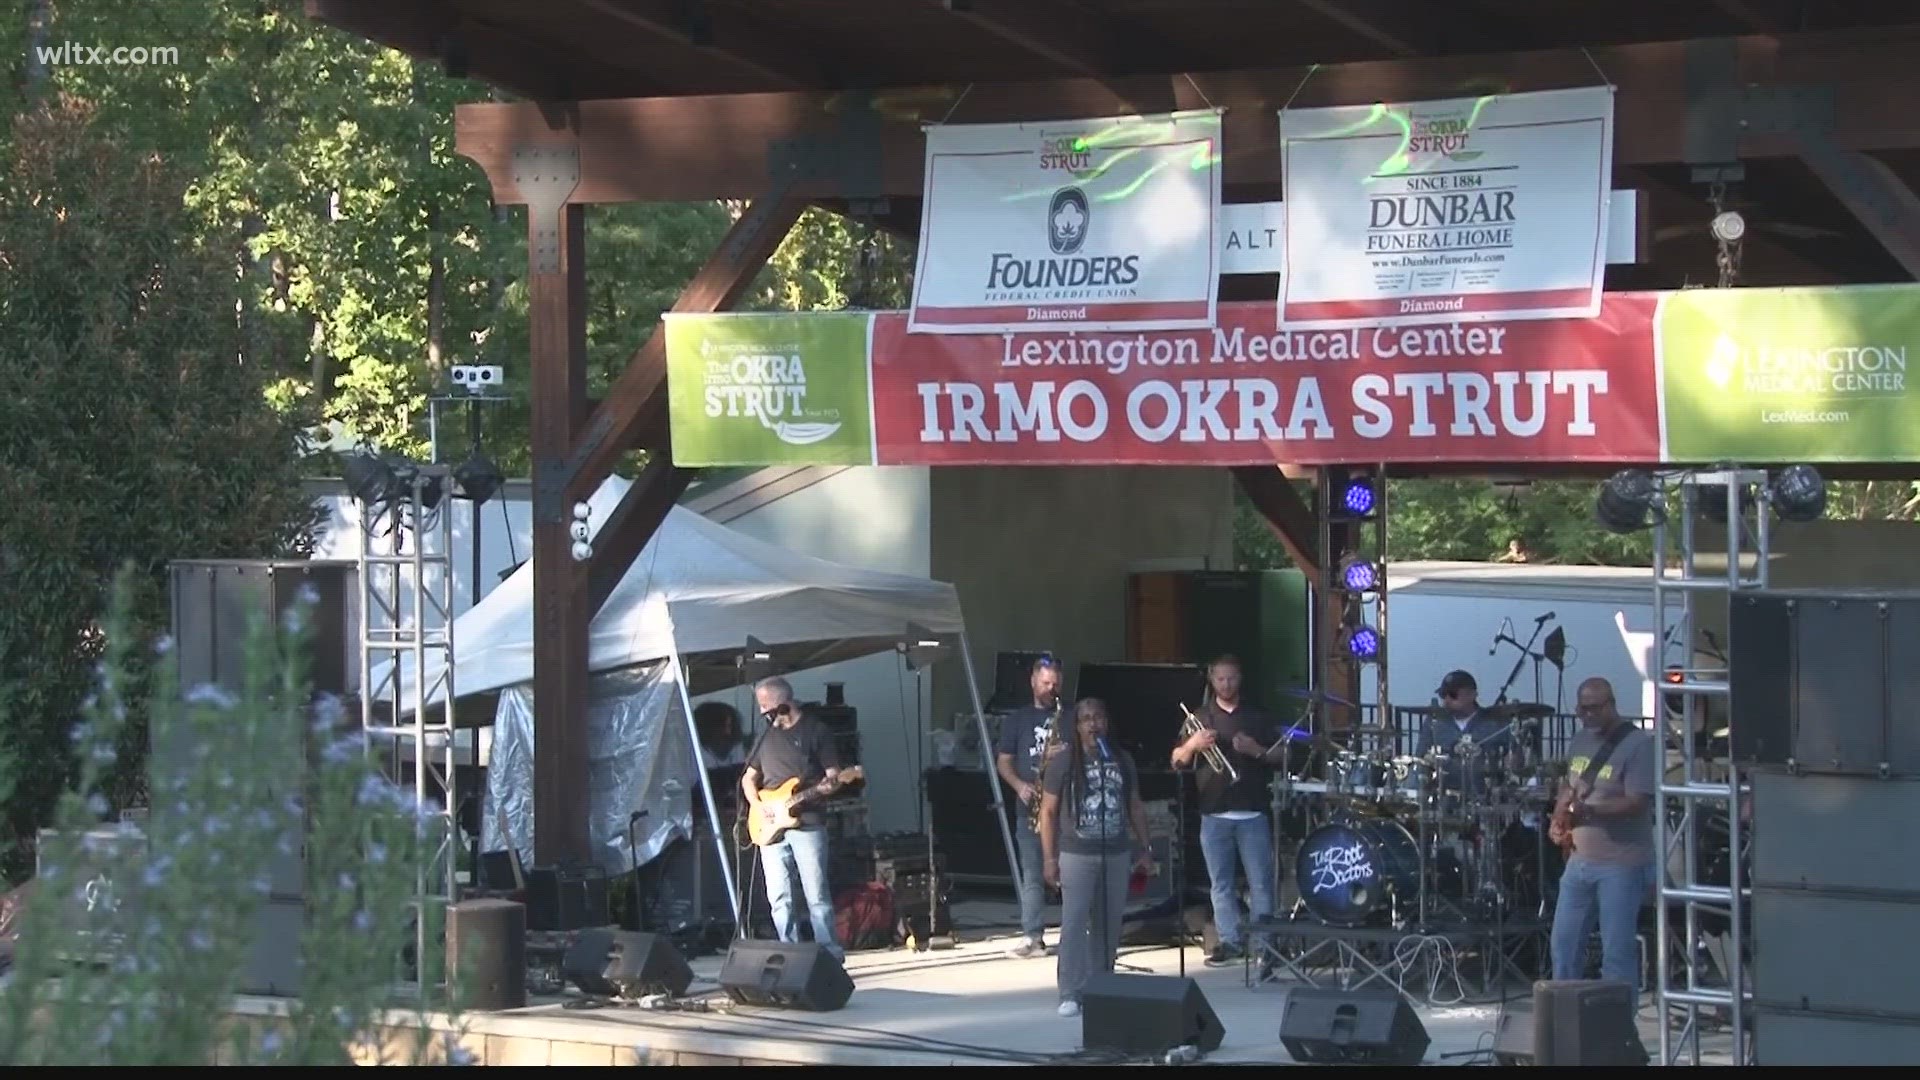 It takes place at the Irmo Community Park Friday and Saturday. There will be rides, live music, and of course, all things Okra.